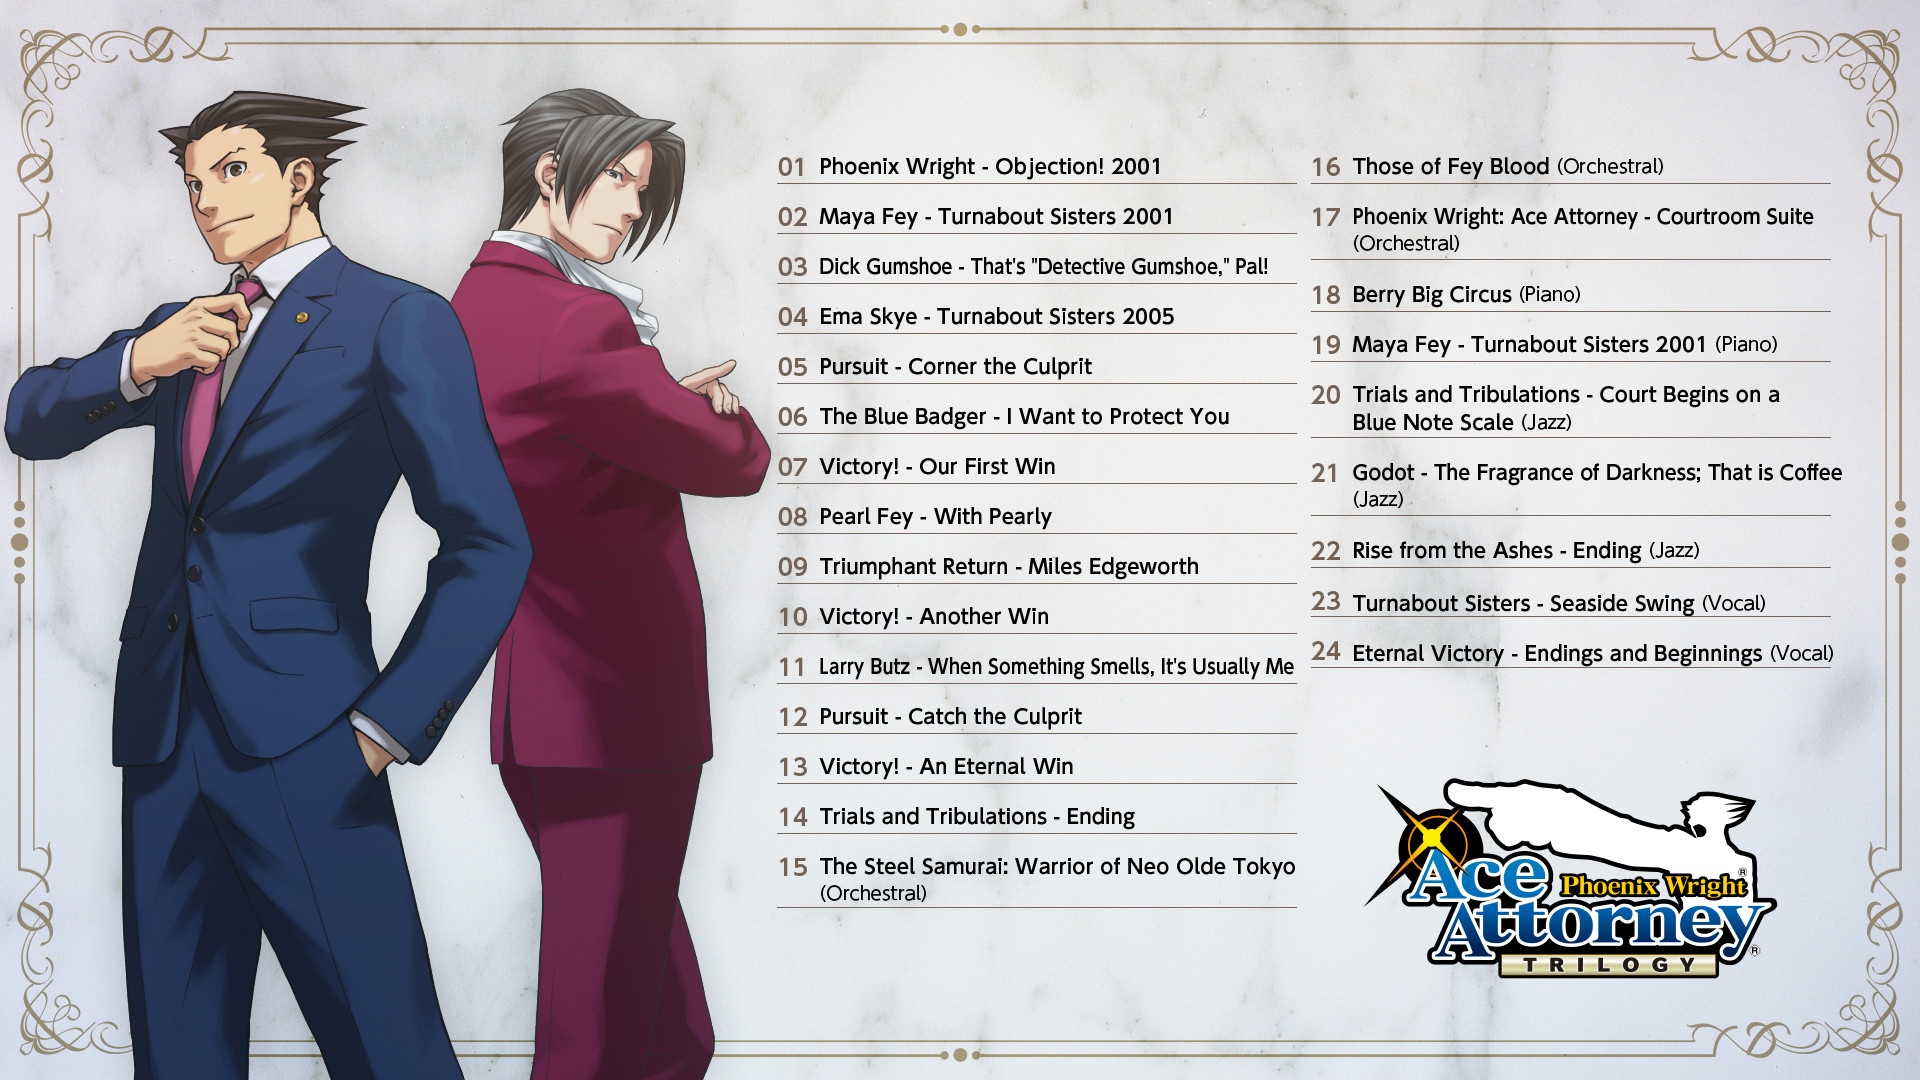 Phoenix Wright: Ace Attorney Trilogy - Turnabout Tunes Bundle (PC) - Steam Key - GLOBAL - 3